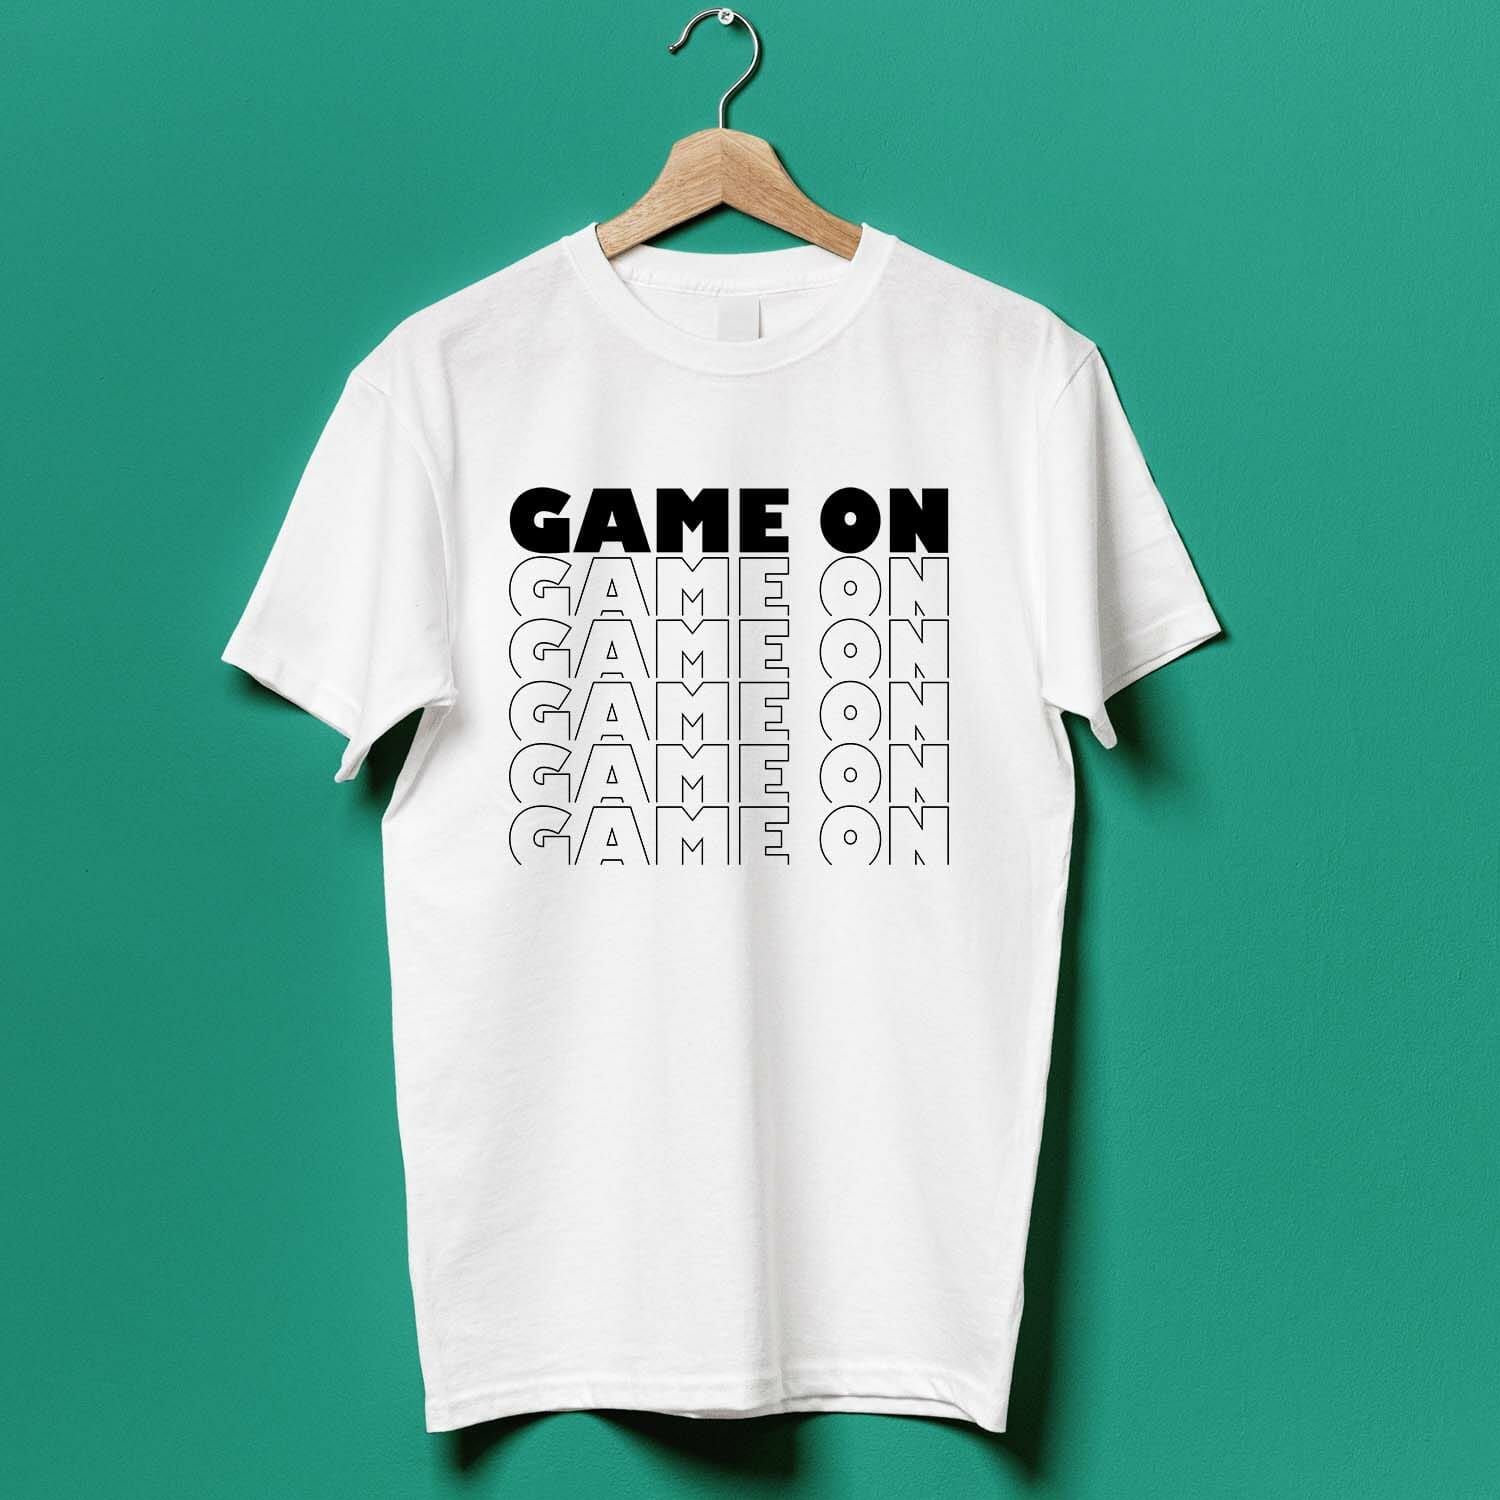 Game ON T-shirt design For Gamers